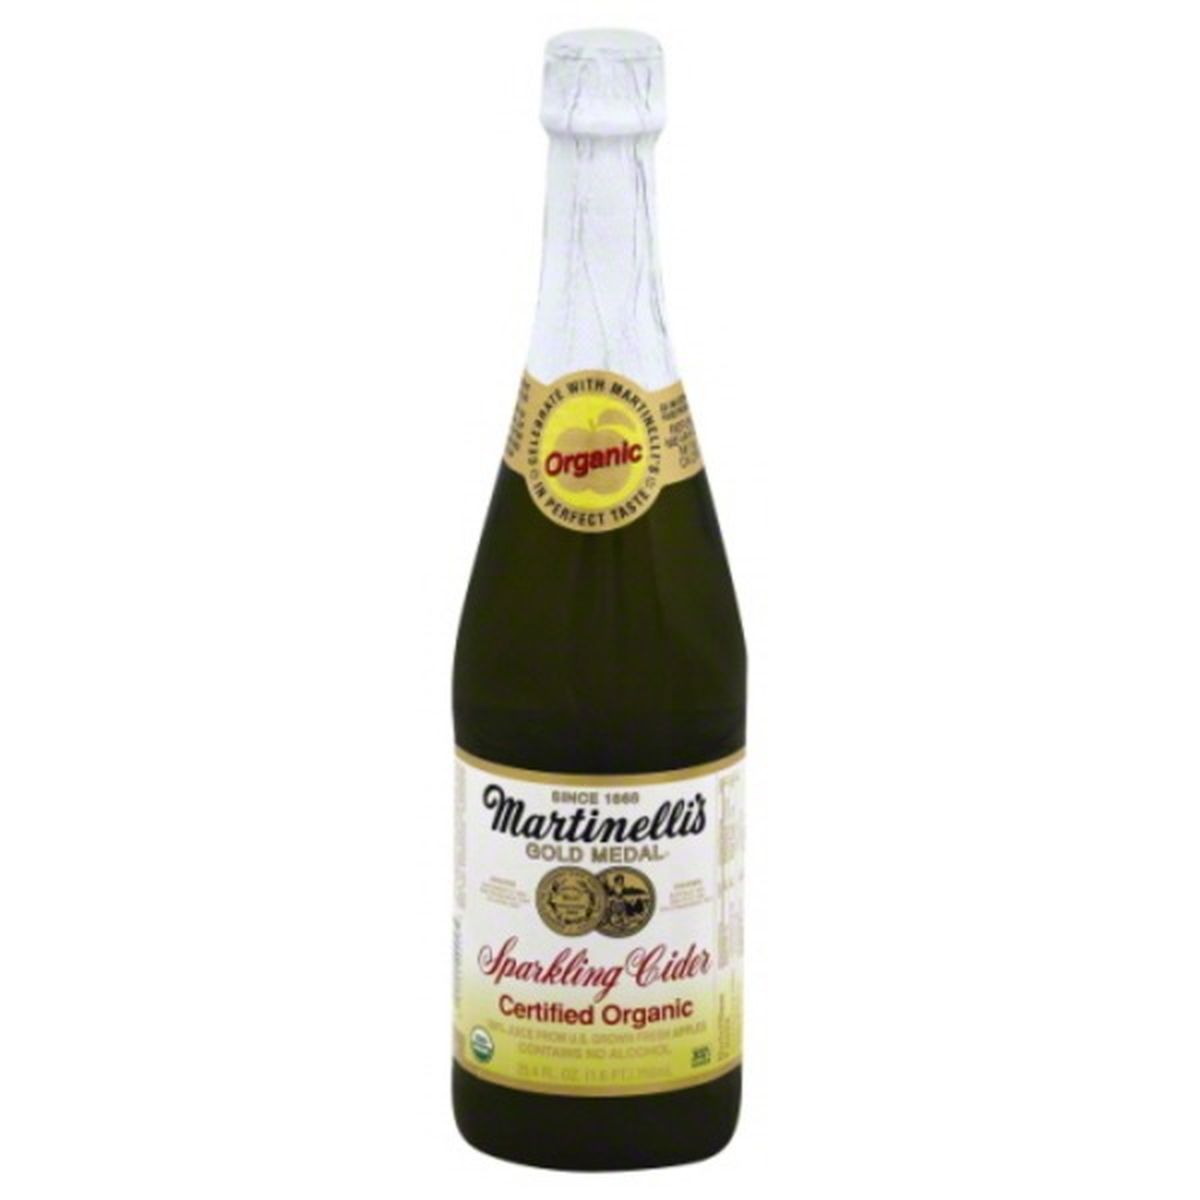 Calories in Martinelli's Gold Medal Sparkling Cider, Organic